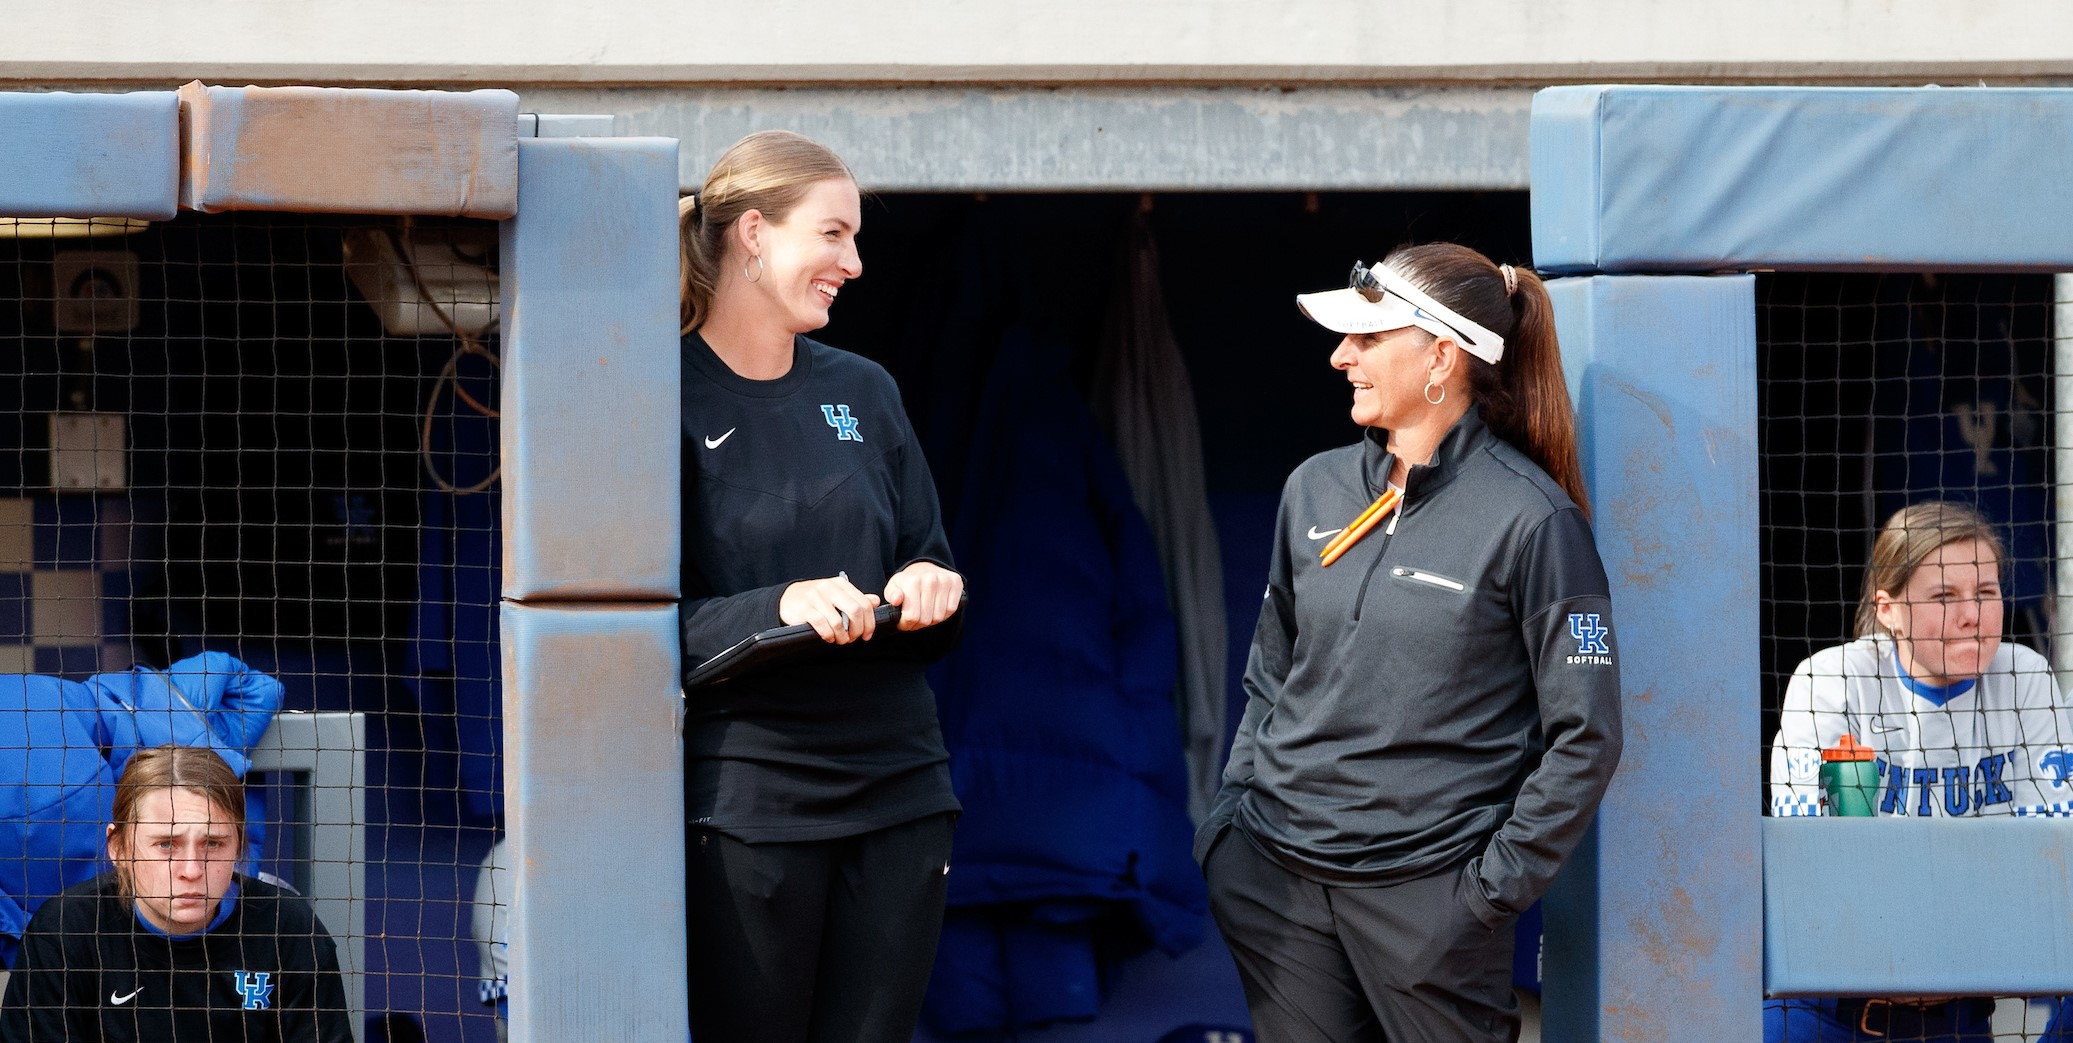 Grace Baalman Hired As Full-Time Assistant Softball Coach